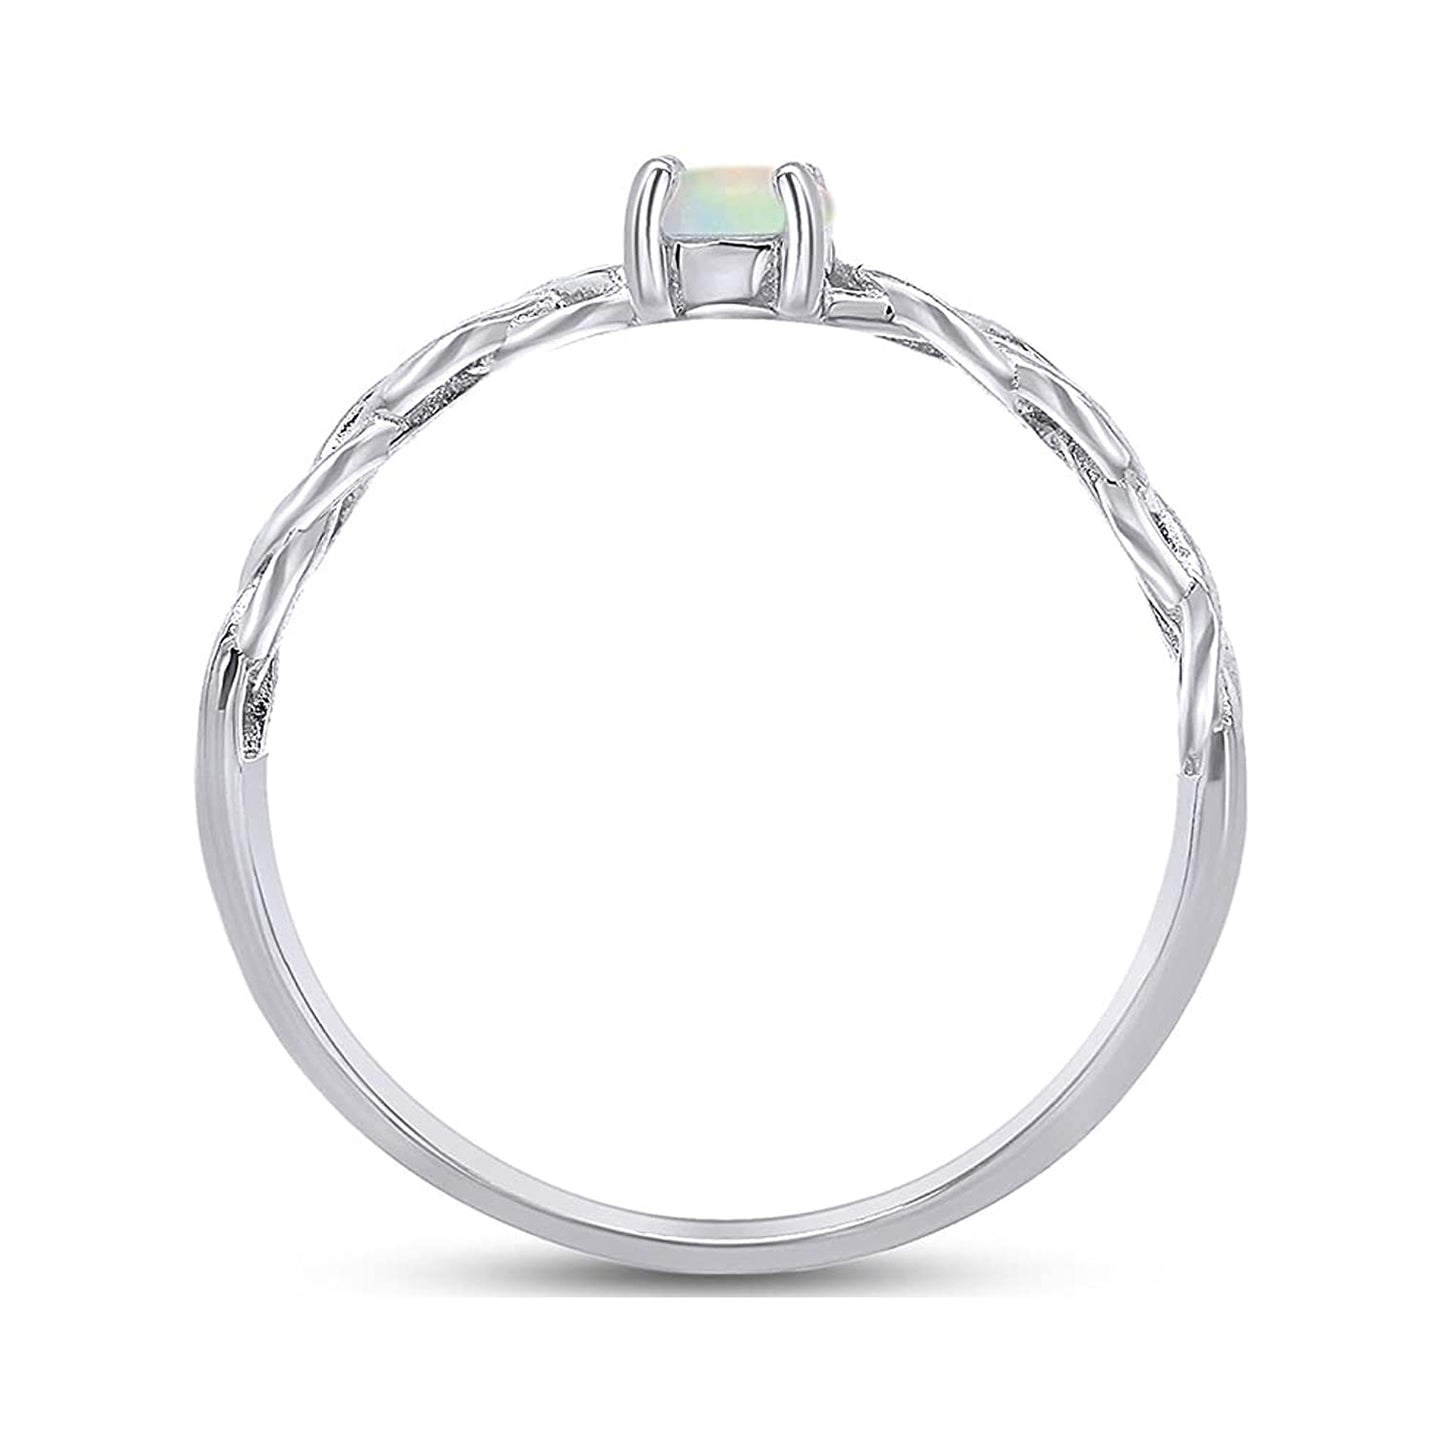 4MM Round Cut Created Opal Solitaire Crisscross Promise Ring For Women In 925 Sterling Silver